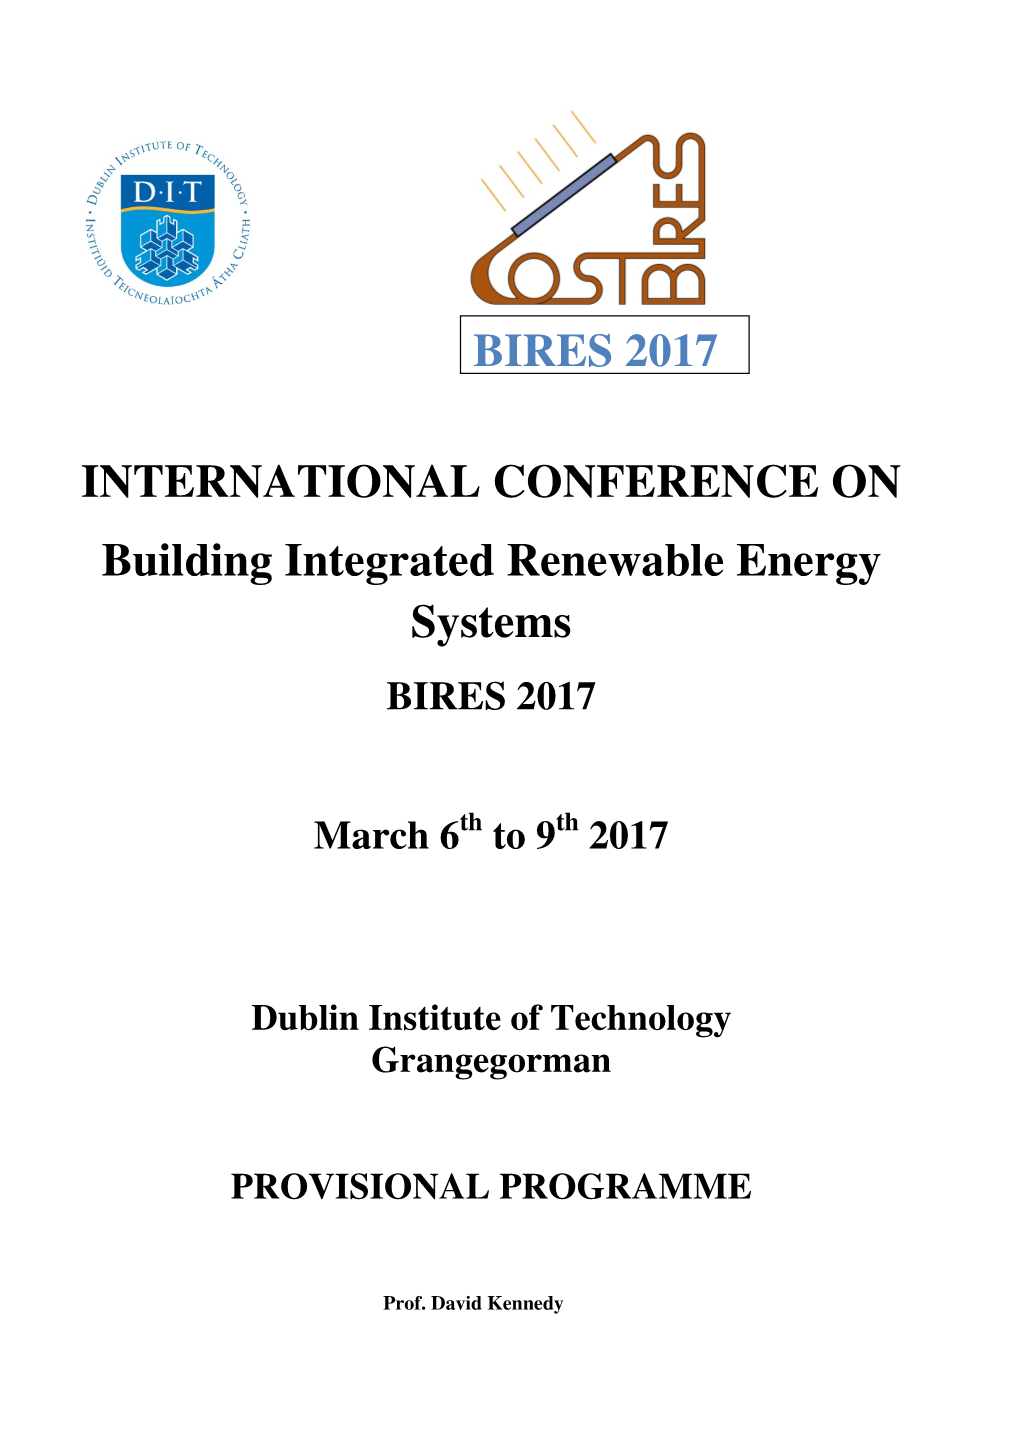 BIRES 2017 INTERNATIONAL CONFERENCE on Building Integrated Renewable Energy Systems